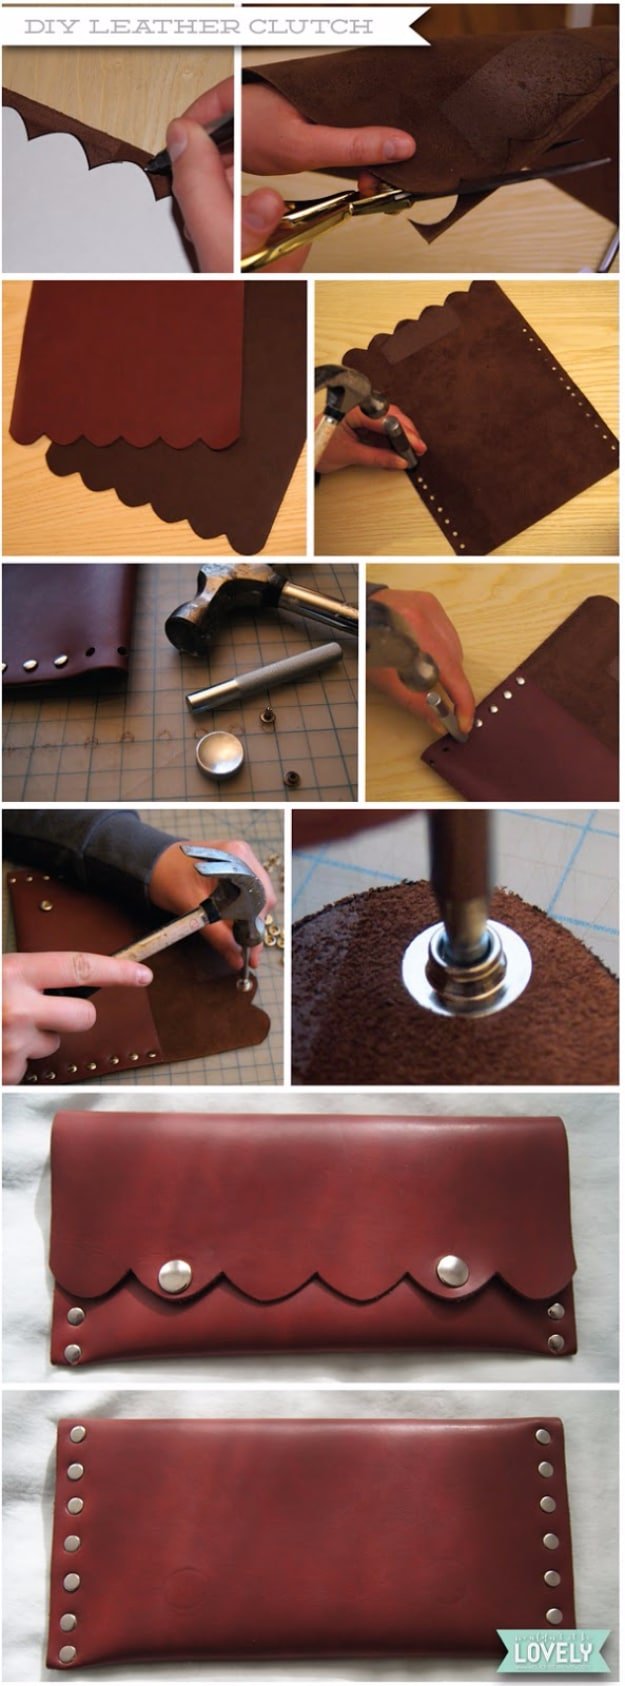 DIY Scalloped Leather Clutch